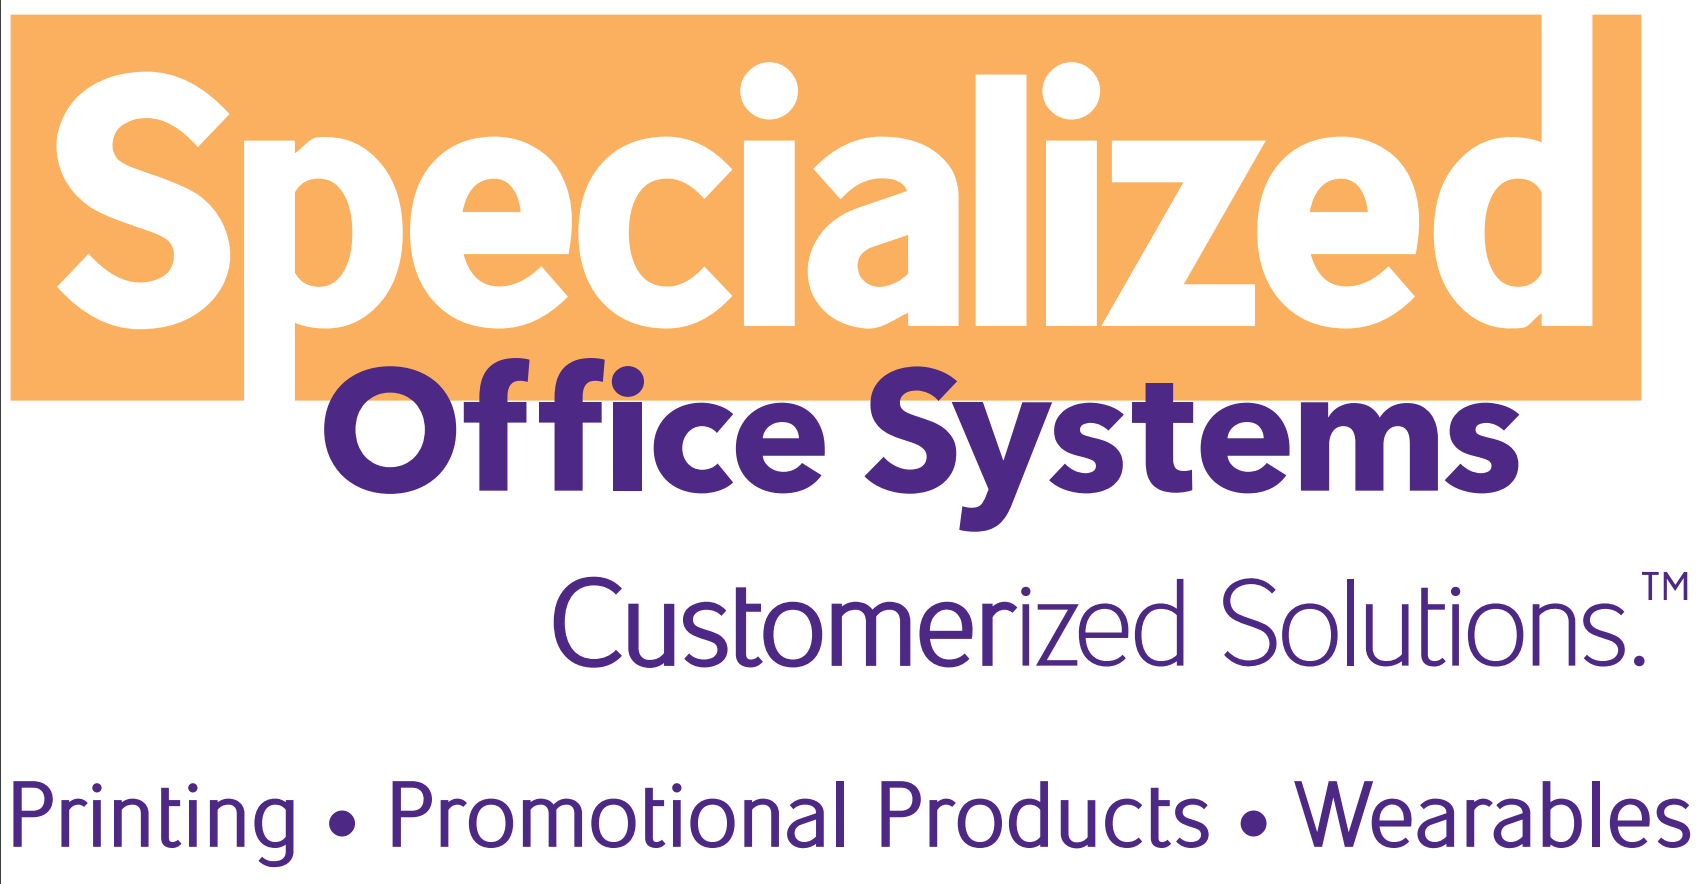 specialized office systems